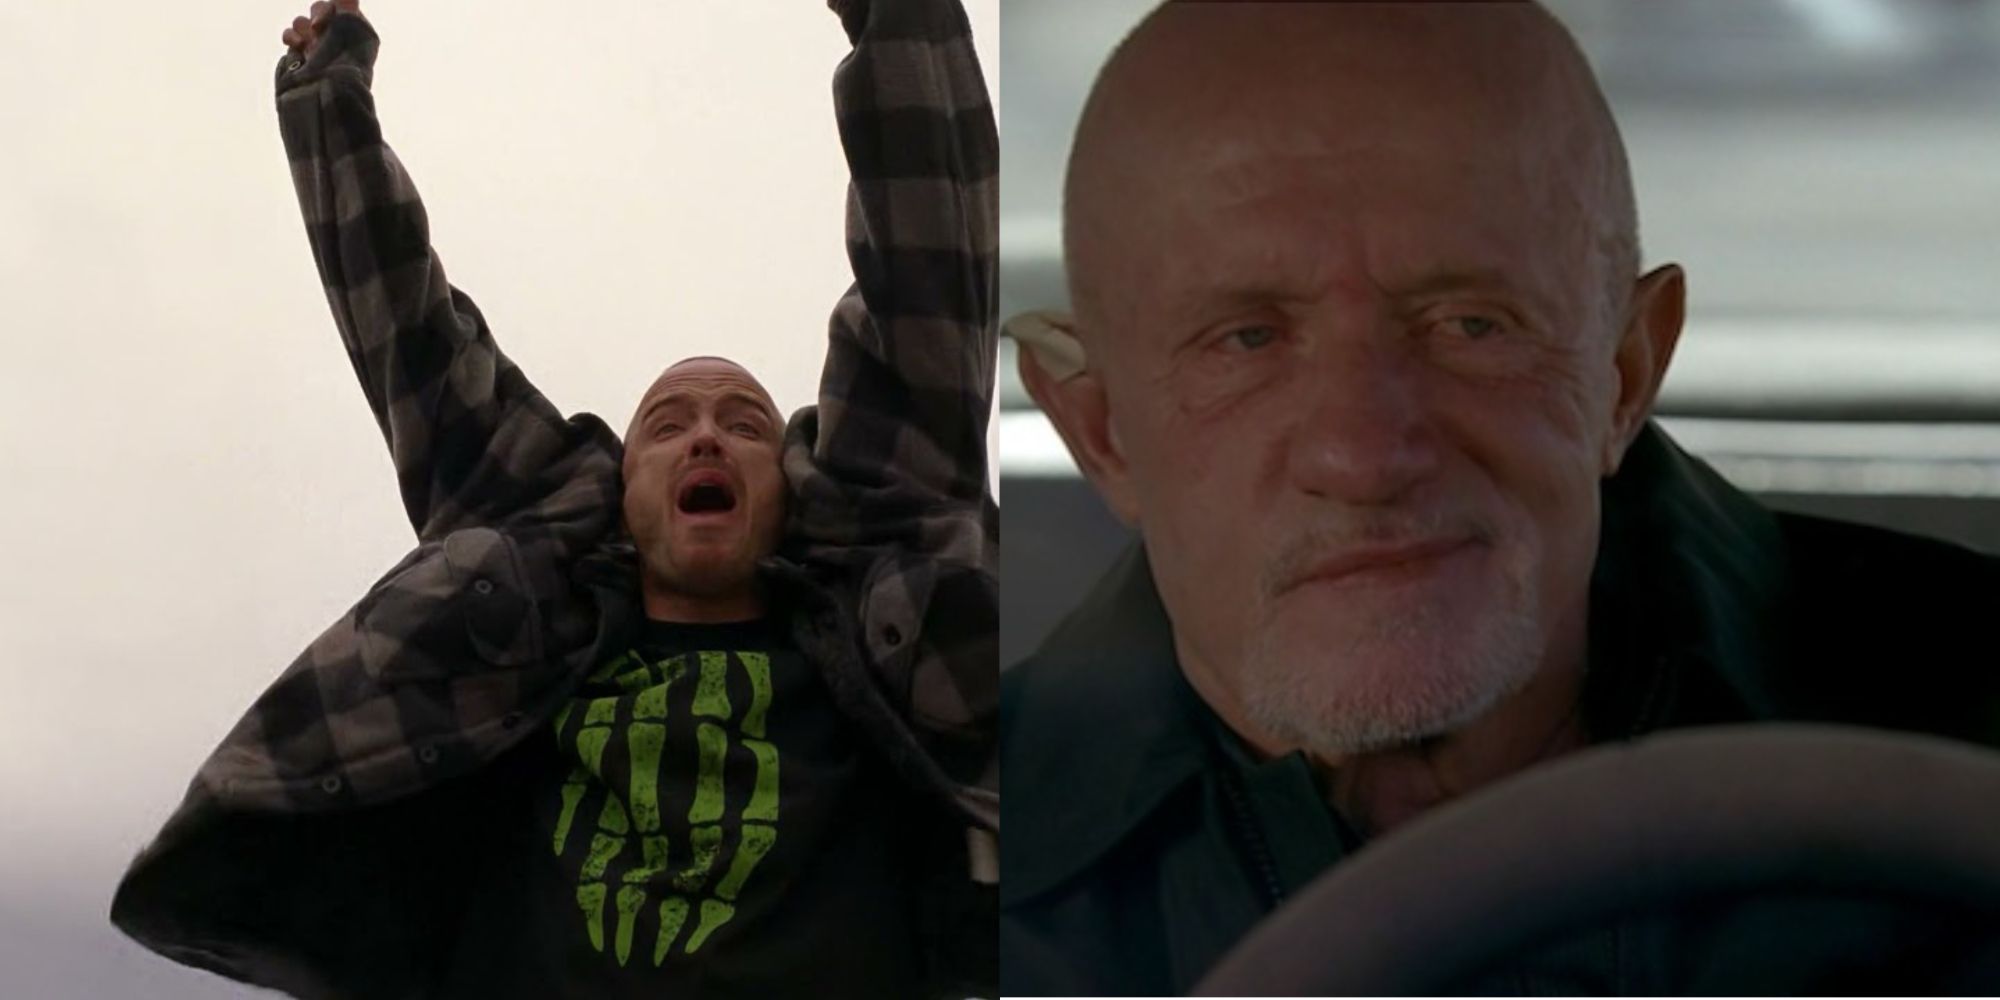 The 10 Funniest Breaking Bad Quotes, According to Reddit